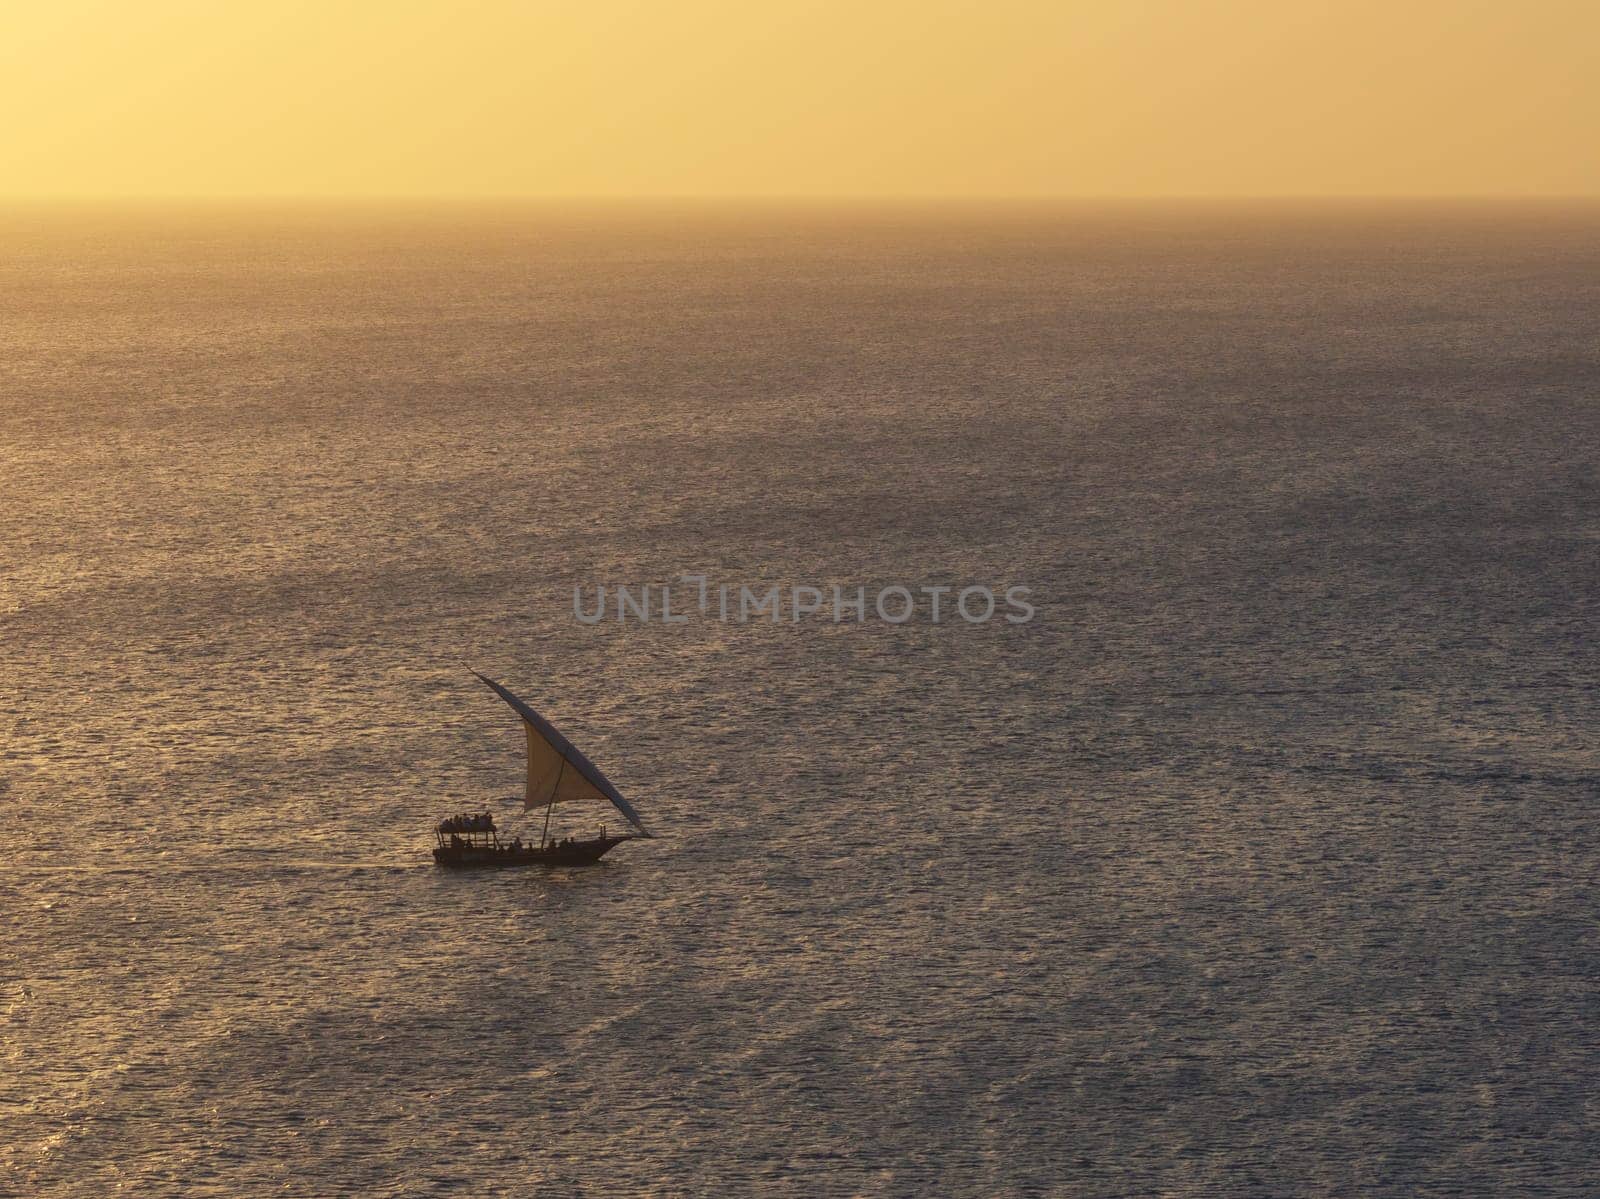 Typical dhow boat sails in the ocean at sunset by Robertobinetti70